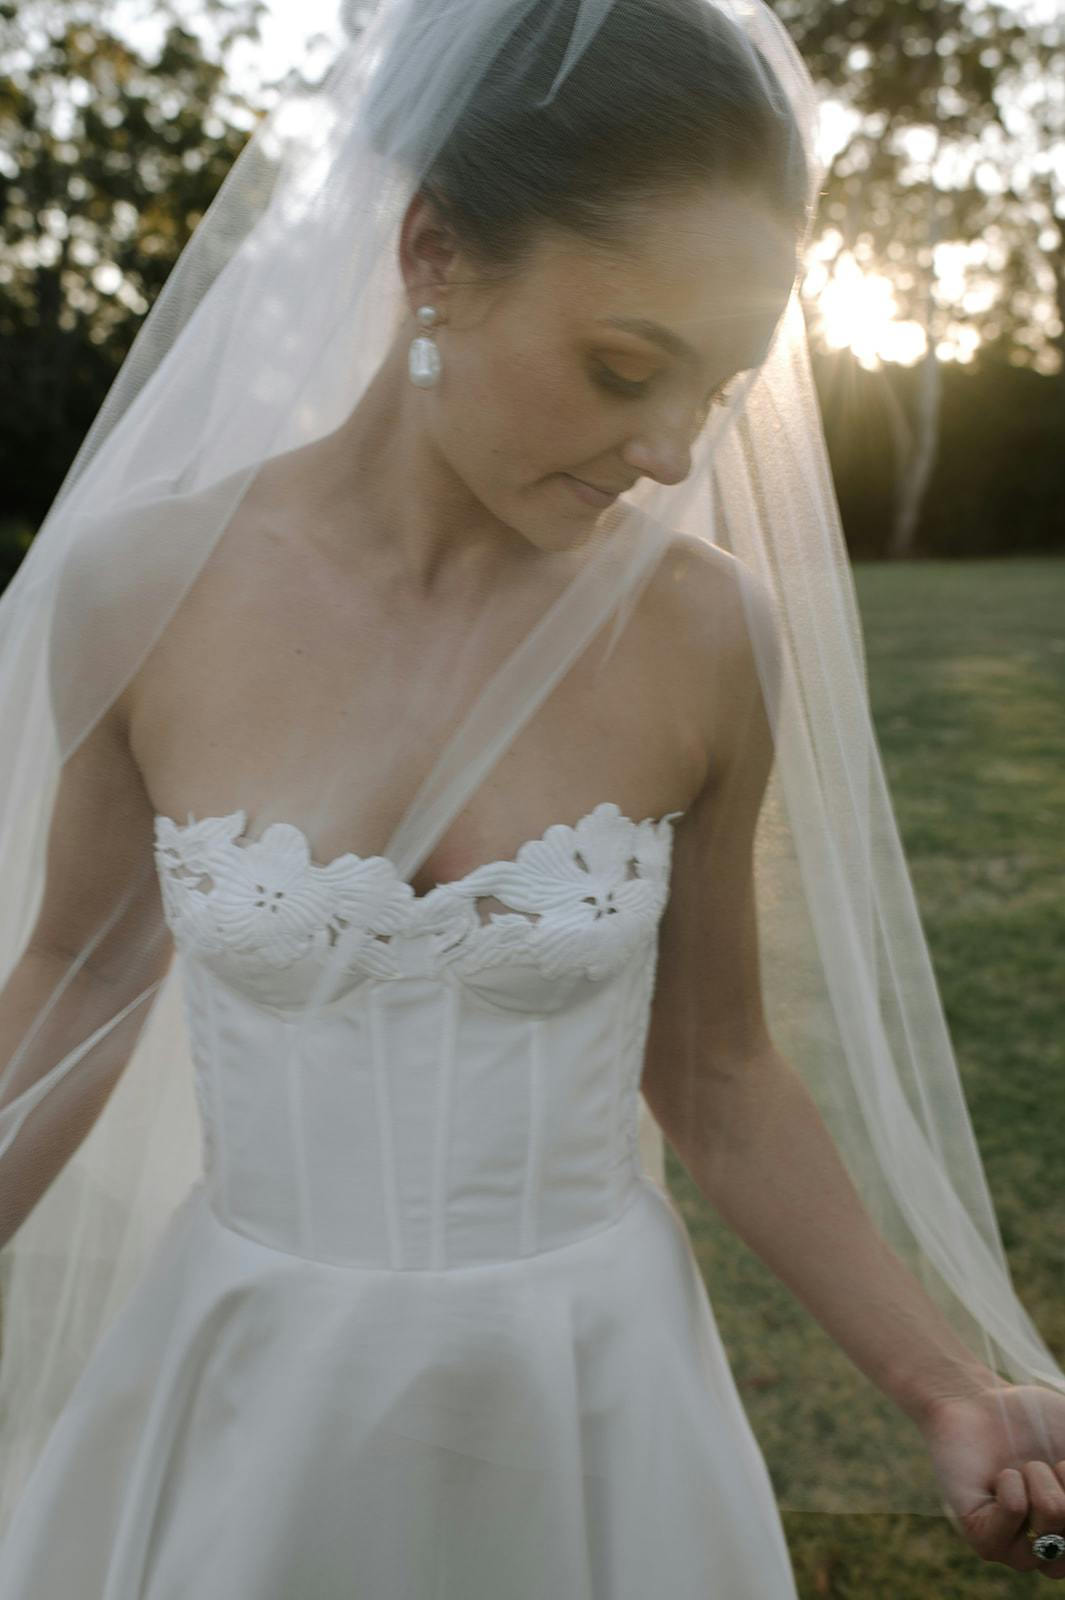 A bride wearing a strapless white wedding gown with floral lace details and a long veil stands outdoors. She looks down thoughtfully, with sunlight filtering through trees in the background.